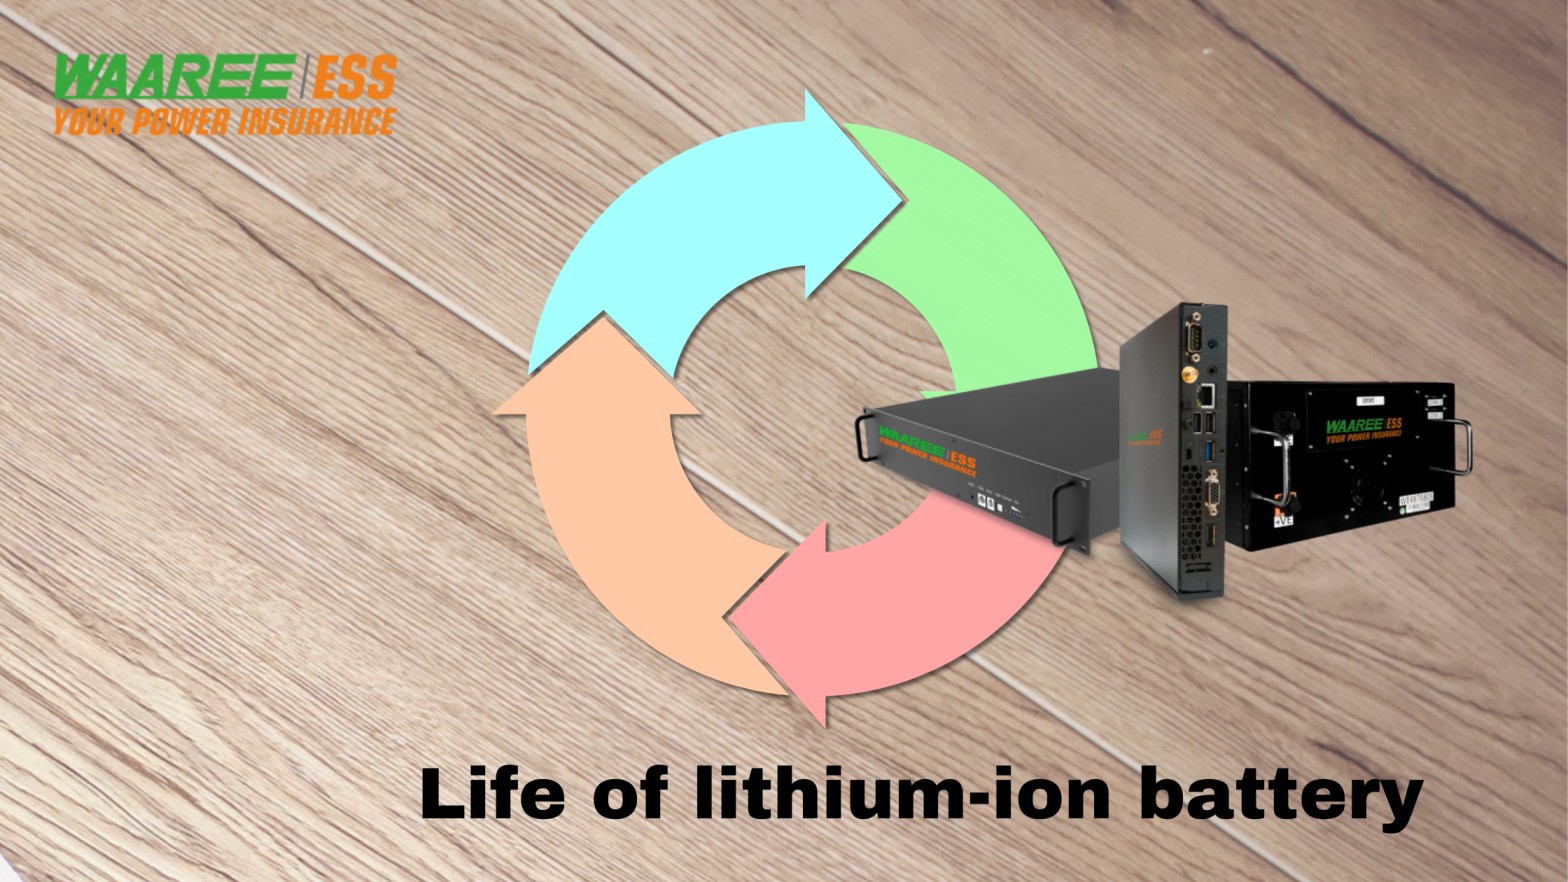 lithium-ion battery, life of lithium-ion battery